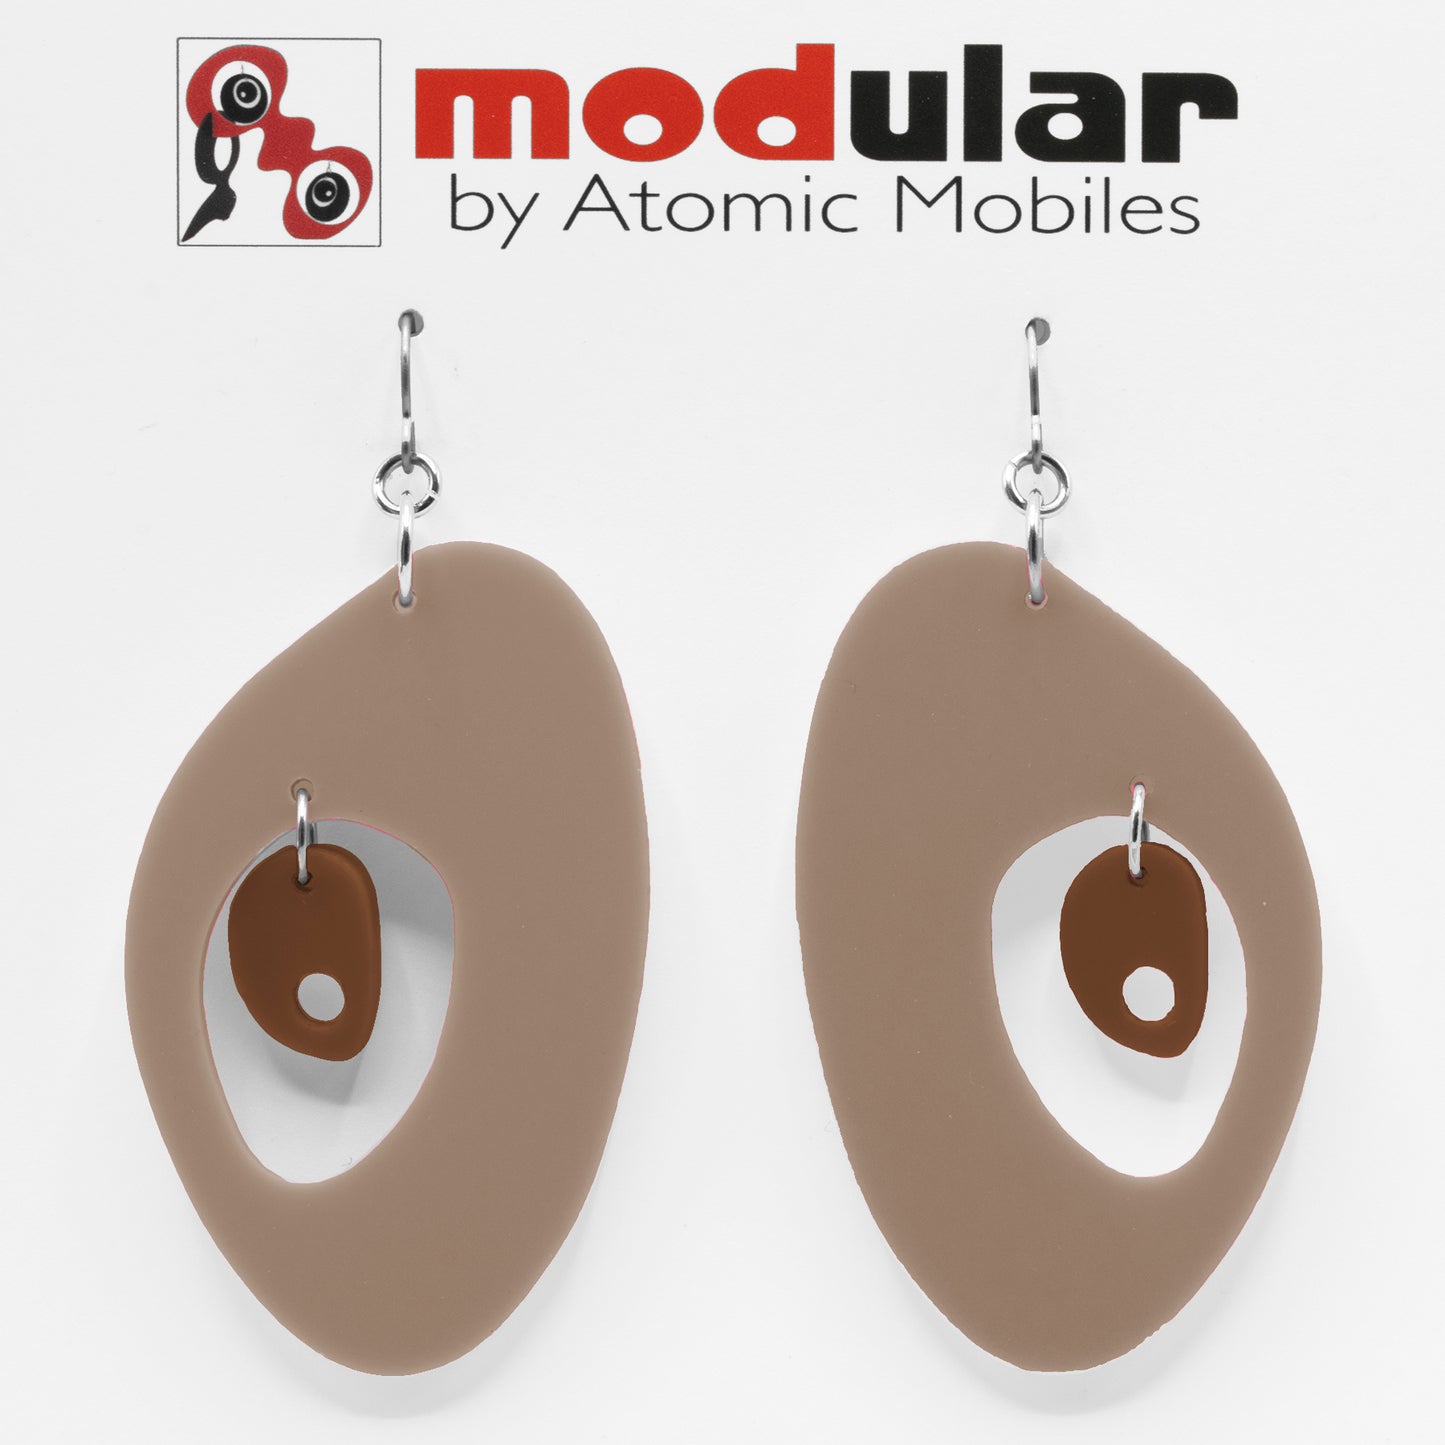 MODular Earrings - The Modernist Statement Earrings in Beige Tan and Brown by AtomicMobiles.com - retro era inspired mod handmade jewelry